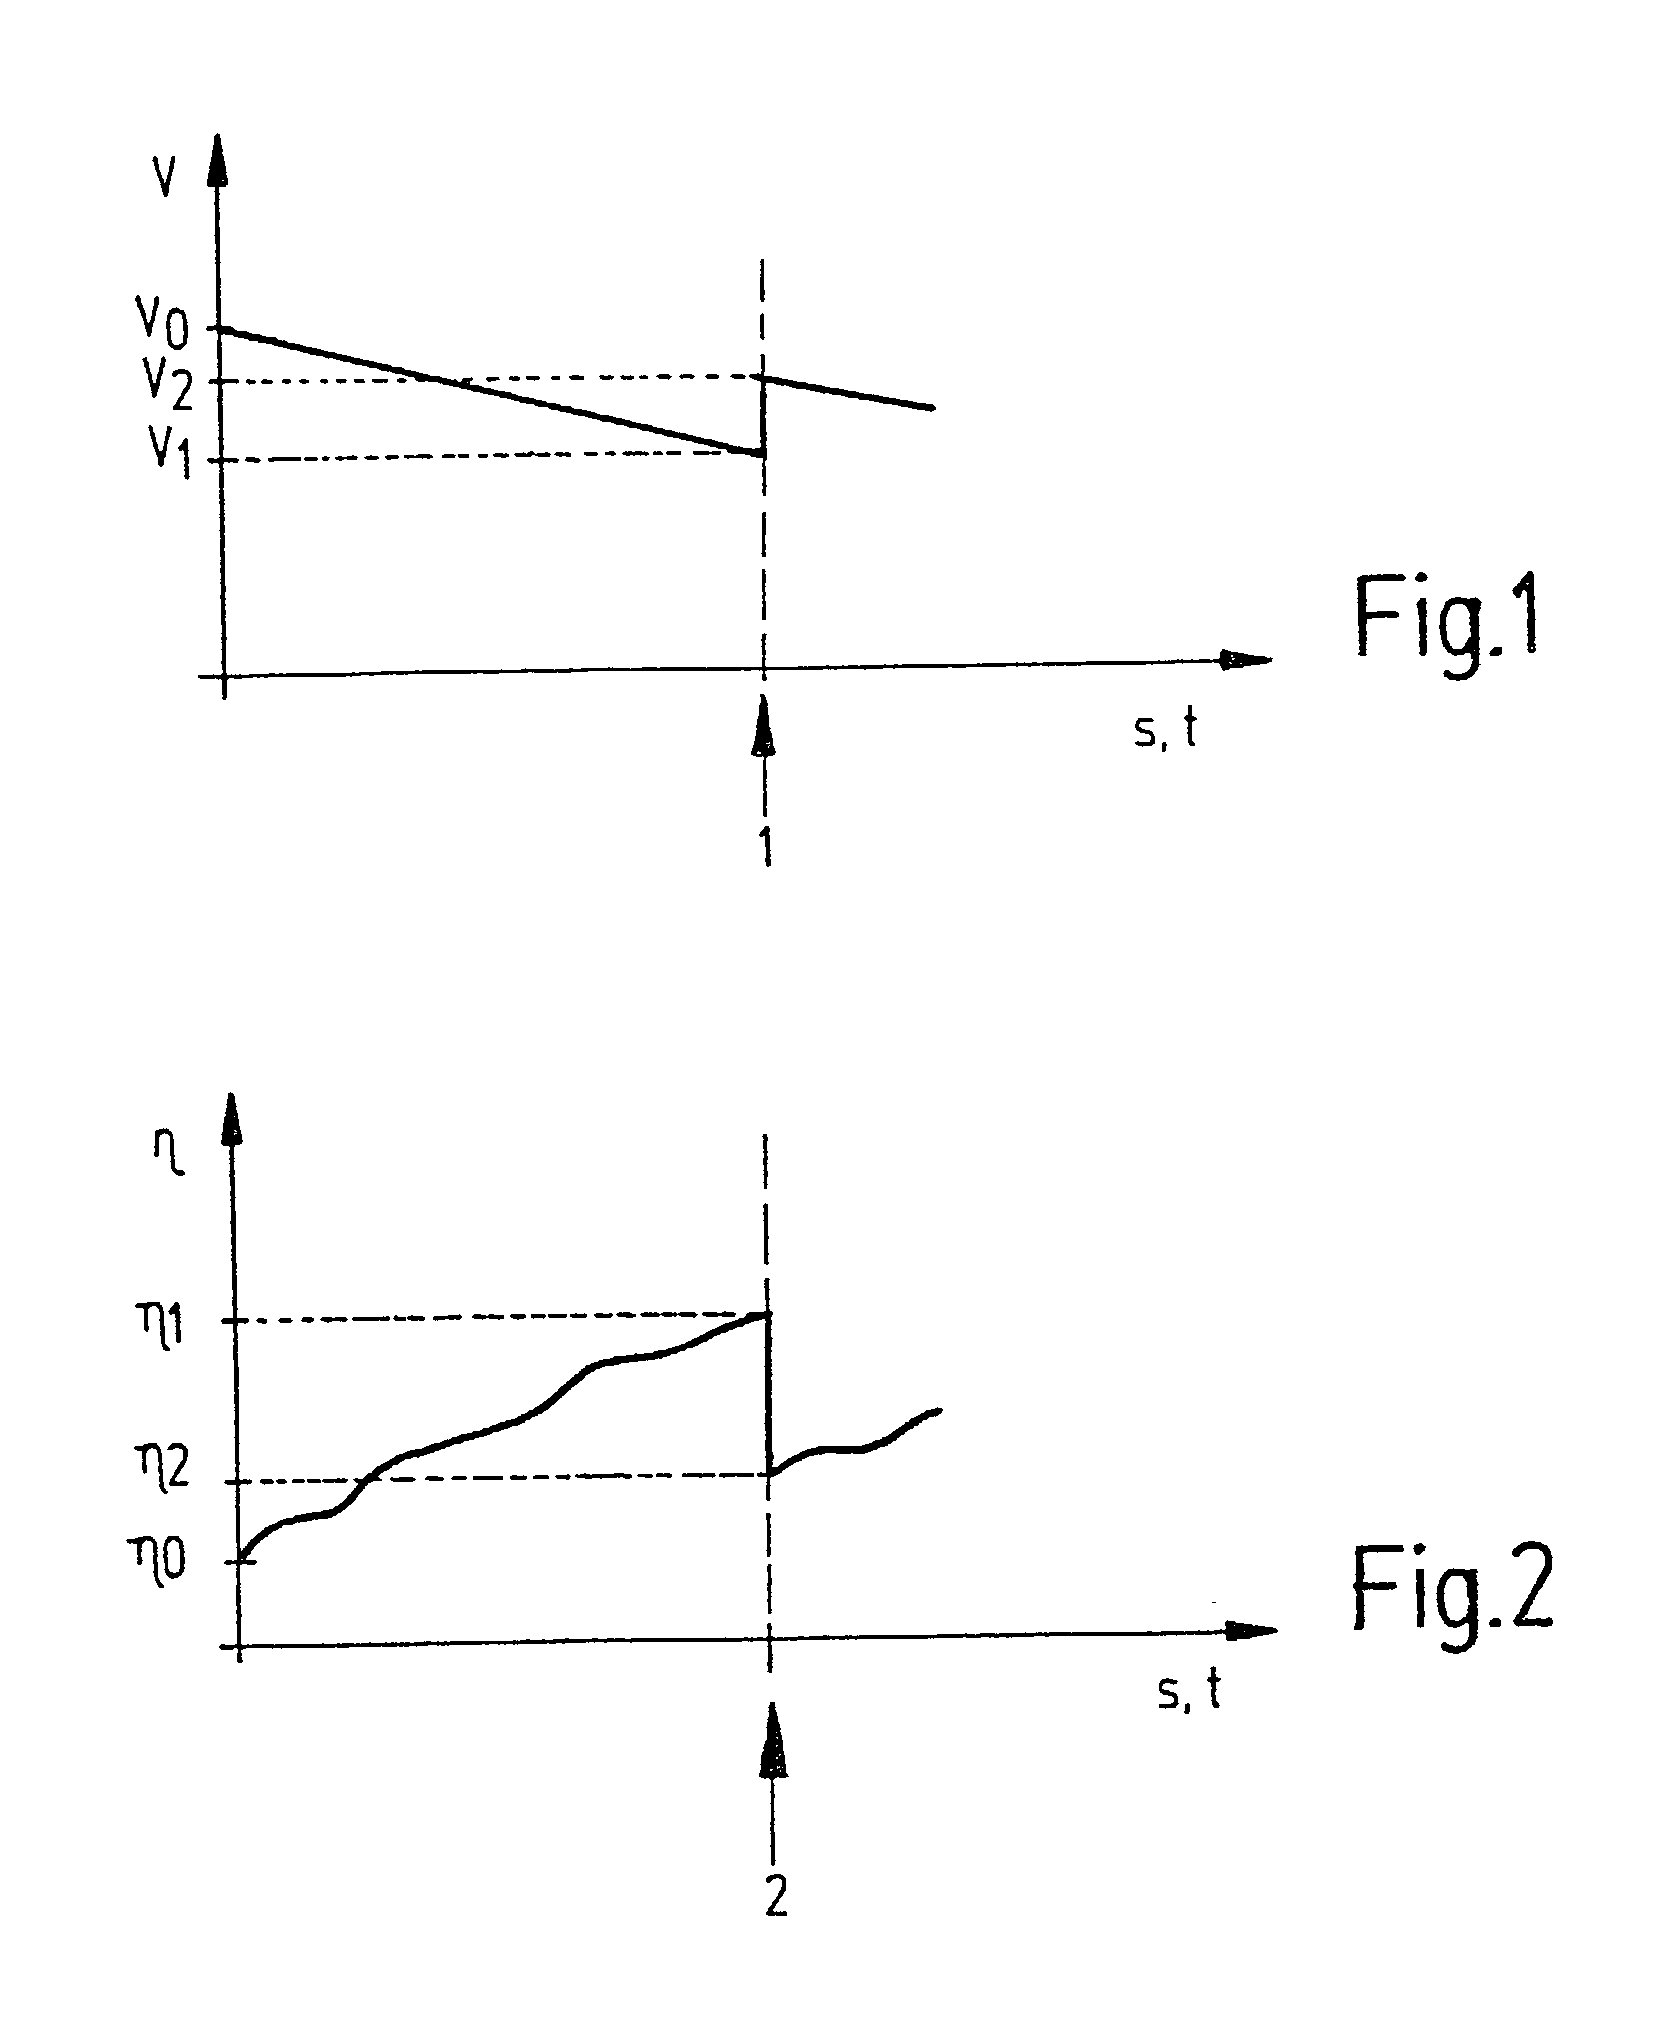 Method of evaluating the wear of engine oil taking into account the addition of fresh oil